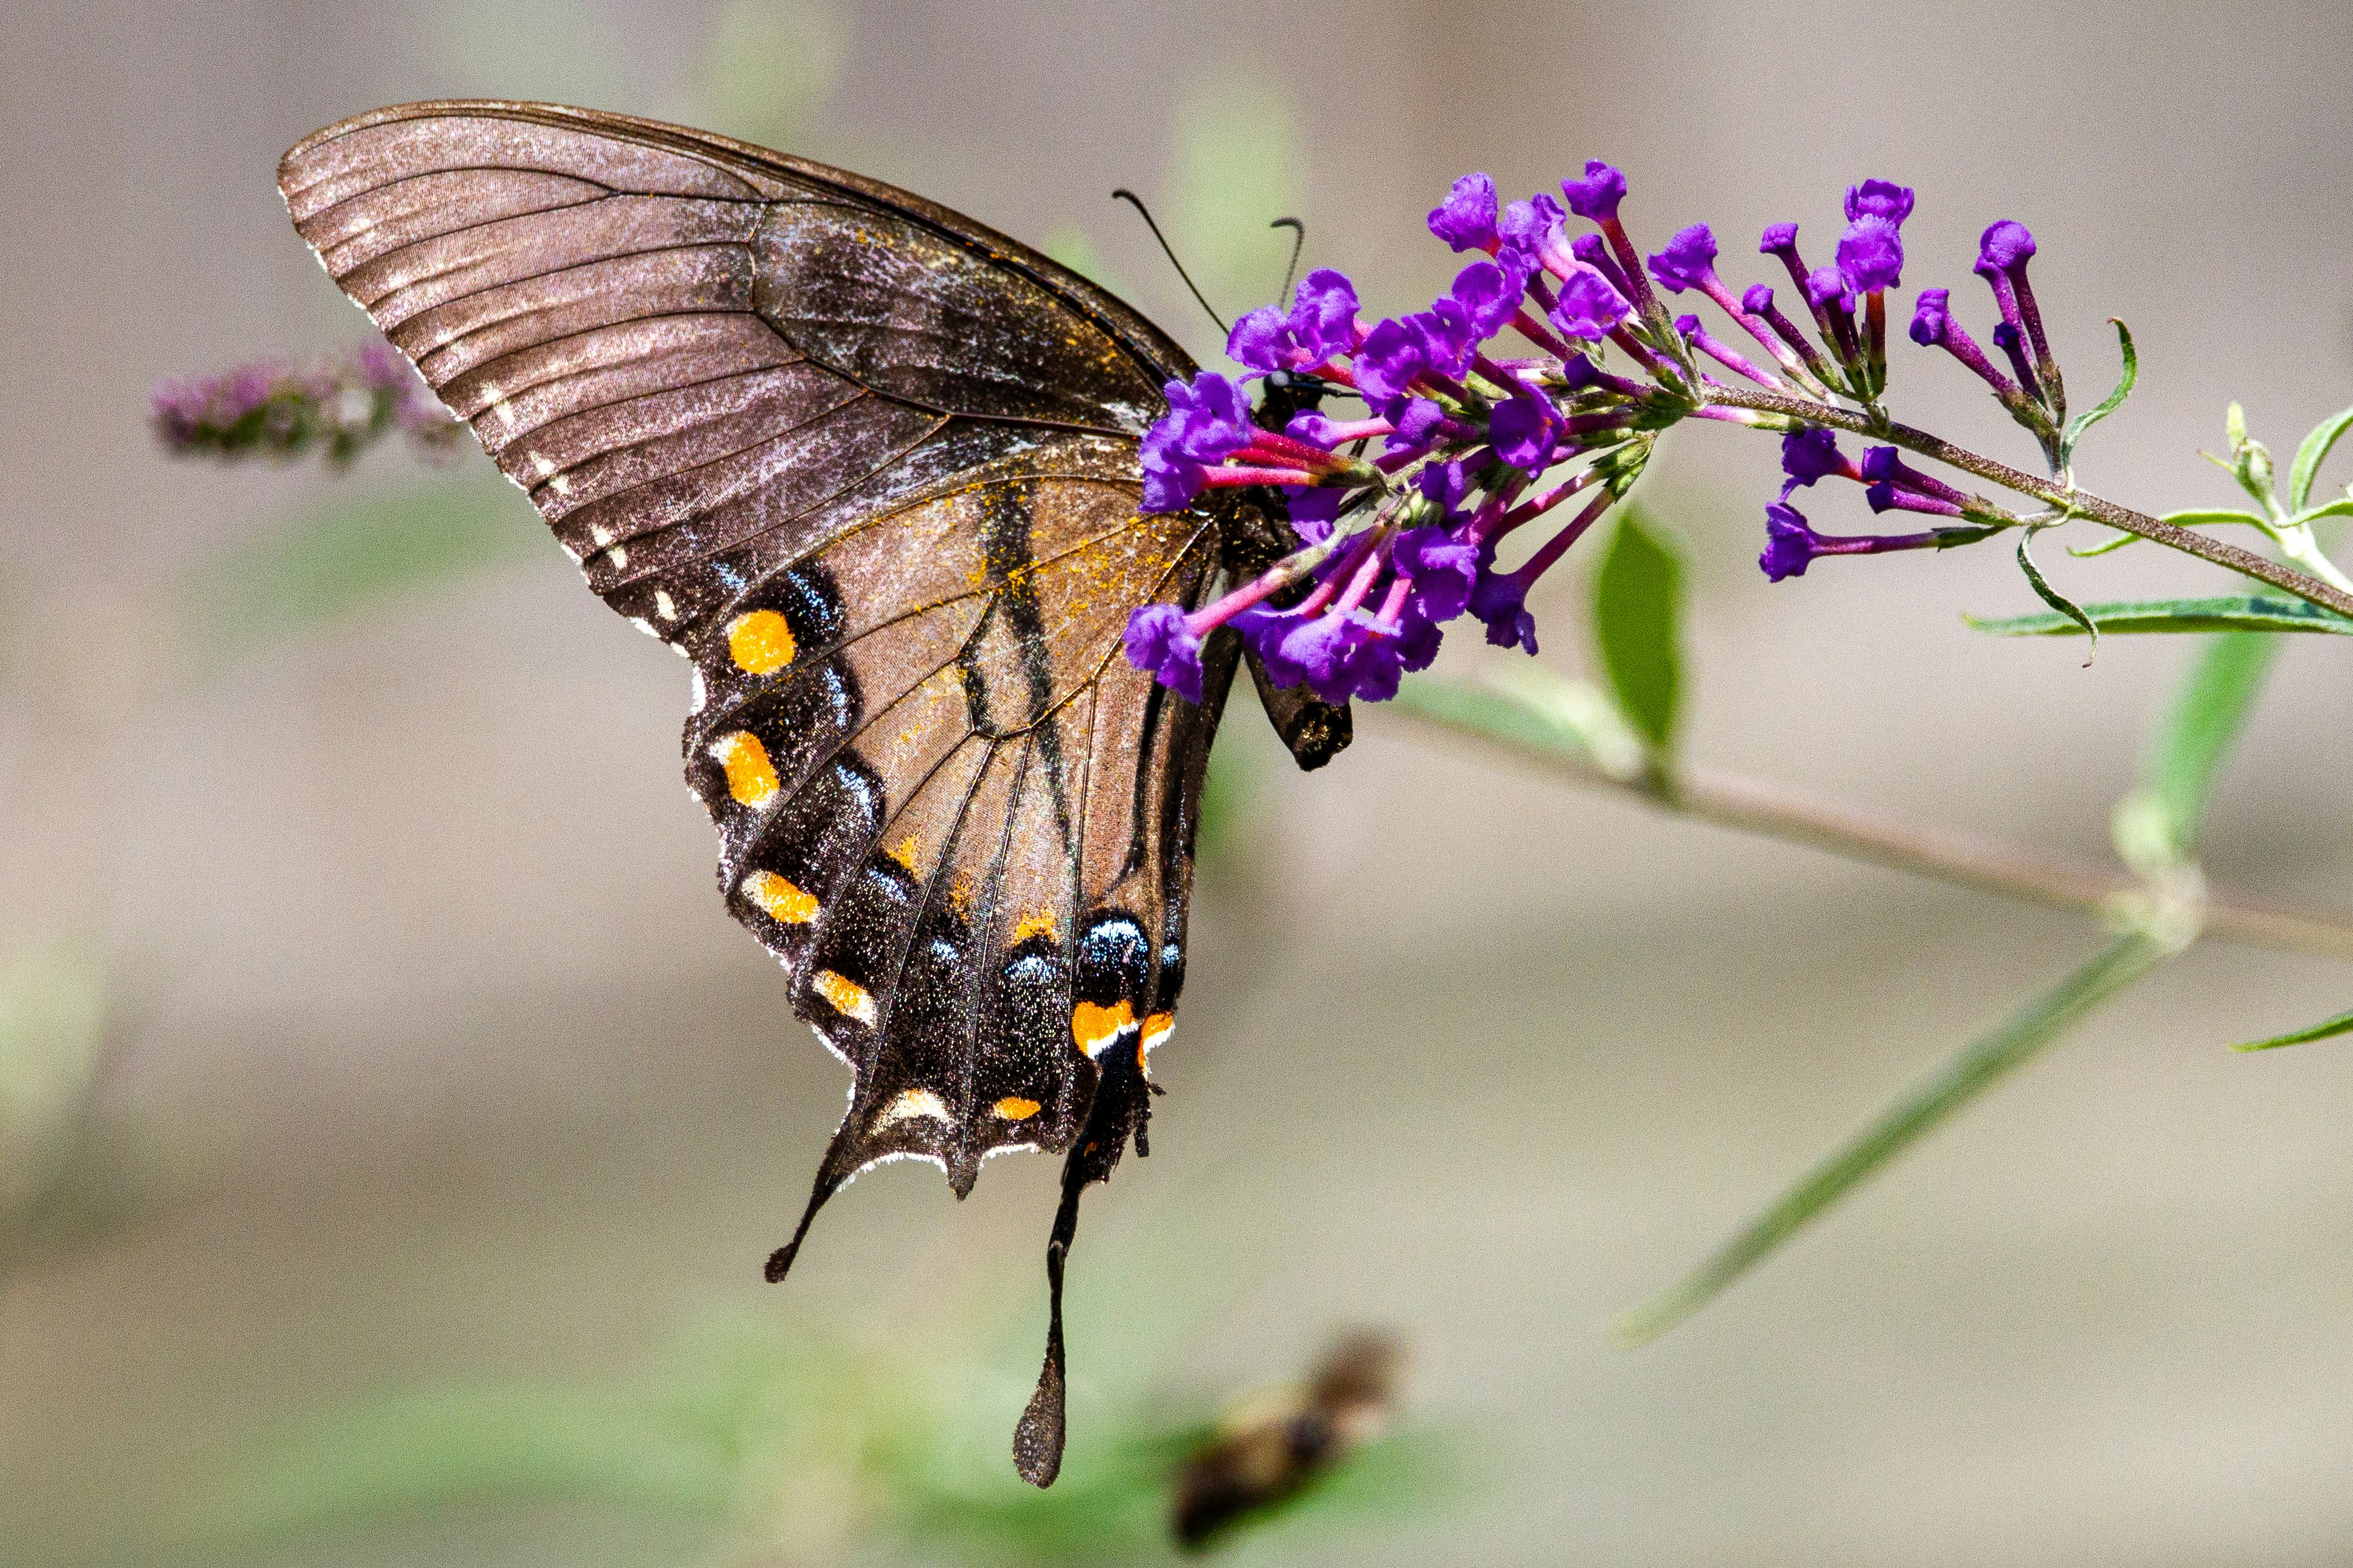 An eastern tiger swallowtail (ventral female, dark morph) butterfly on the bloom of a butterfly bush.